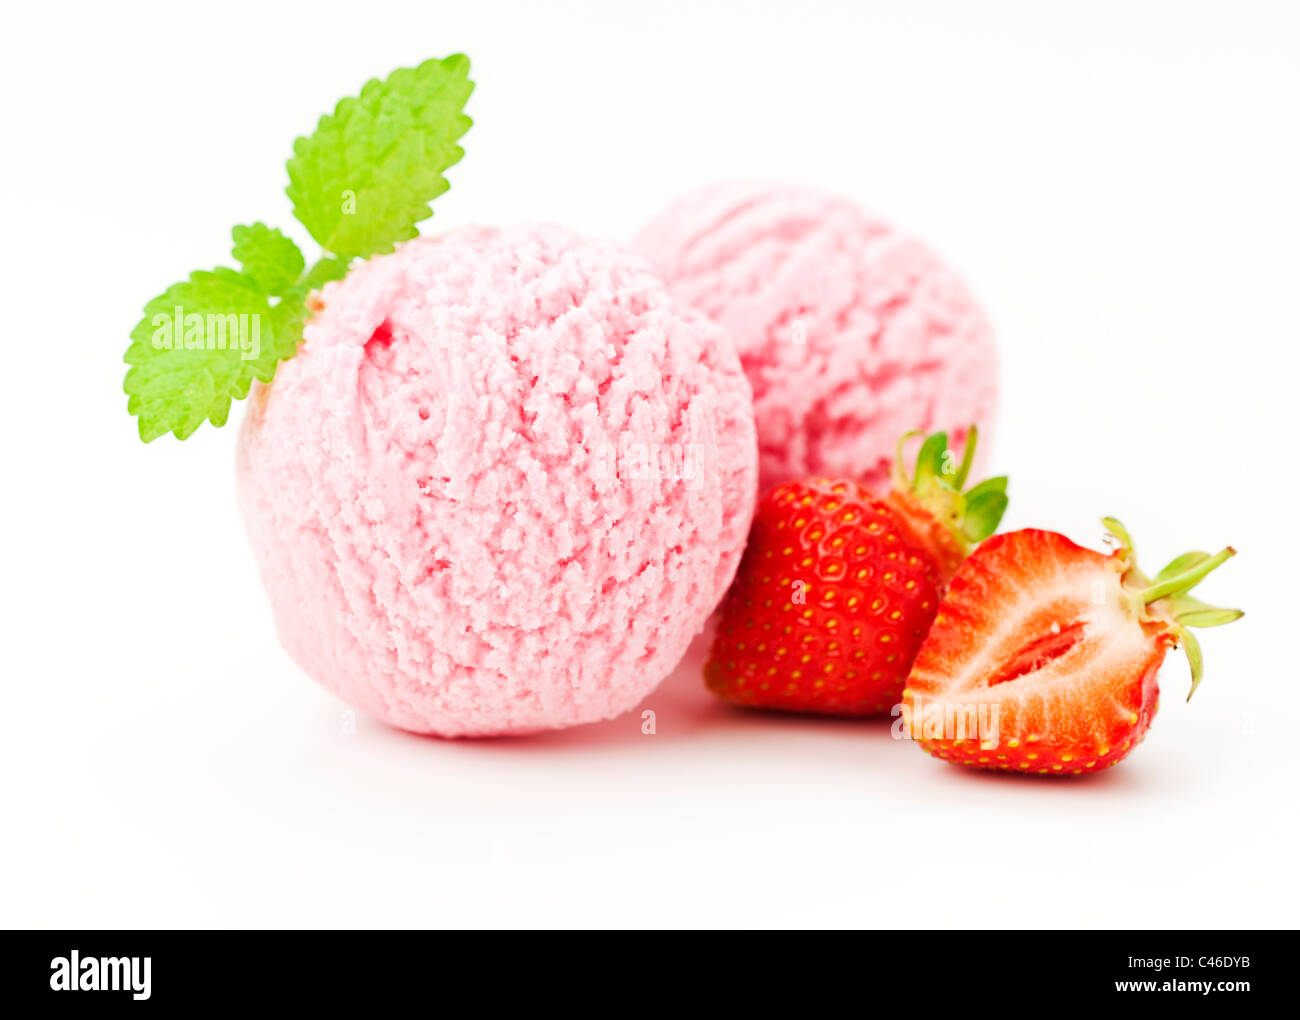 two scoops of strawberry ice cream, strawberry fruit, mint leaf, white background Stock Photo